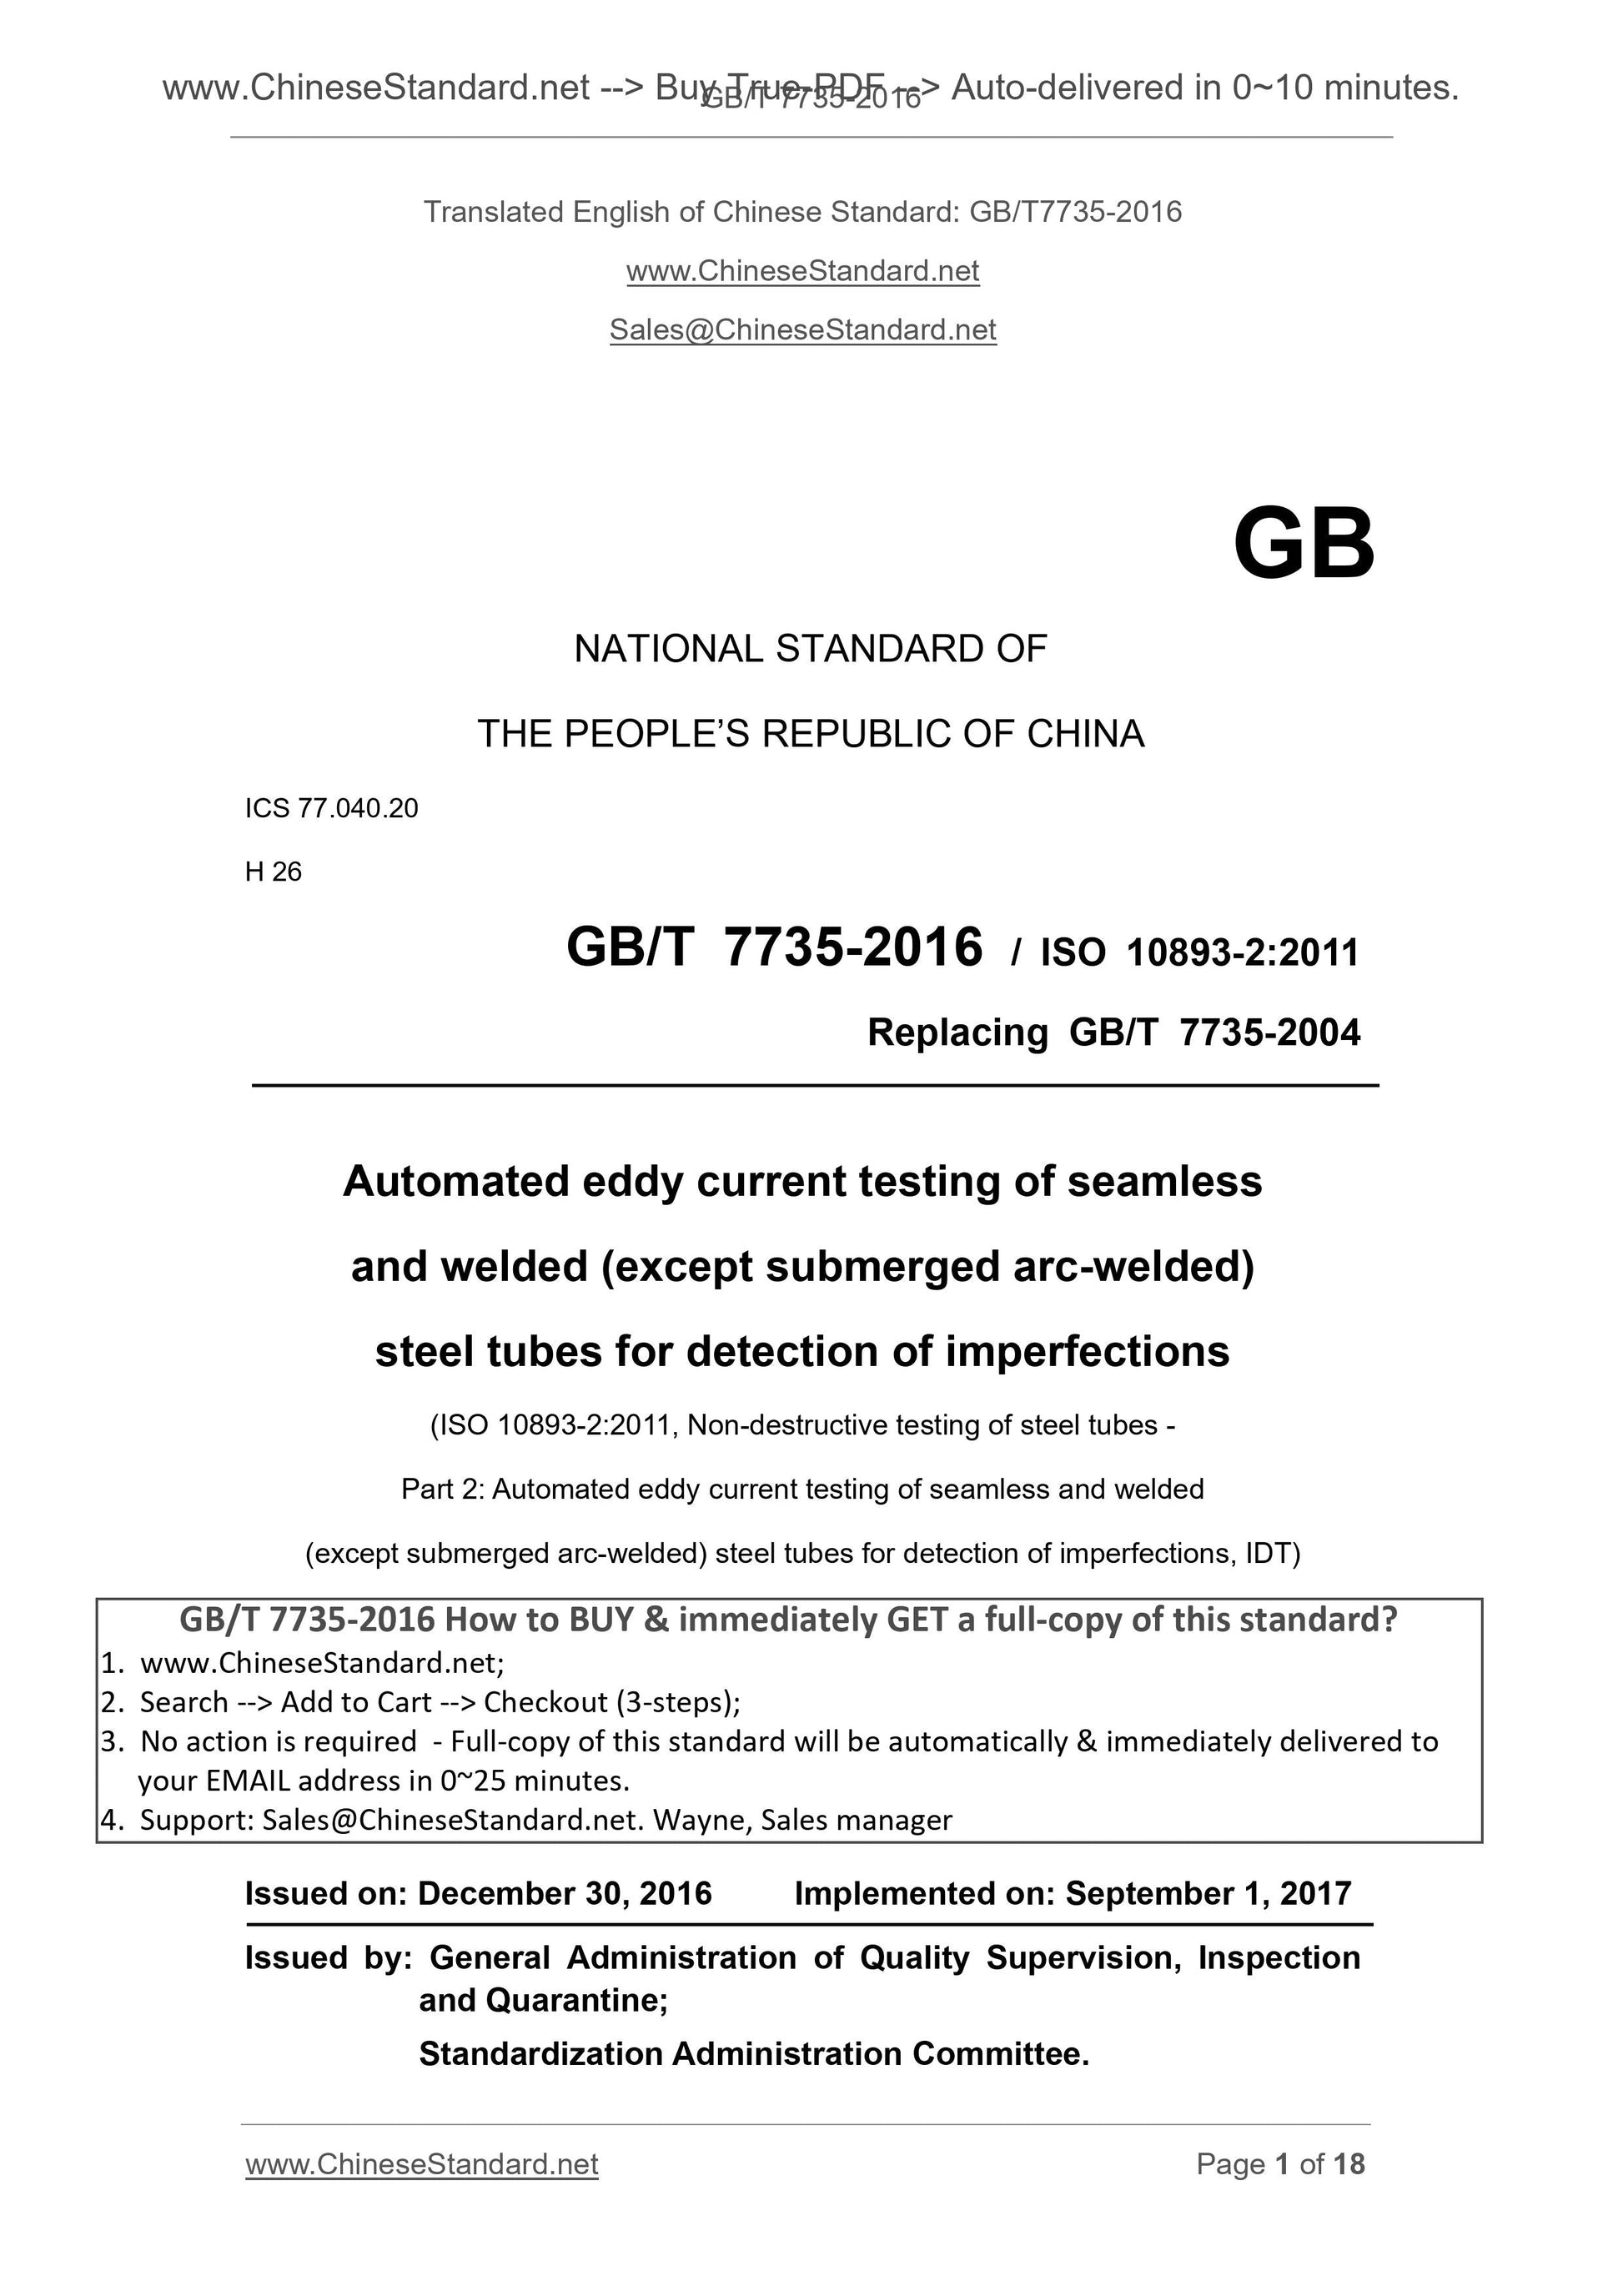 GB/T 7735-2016 Page 1